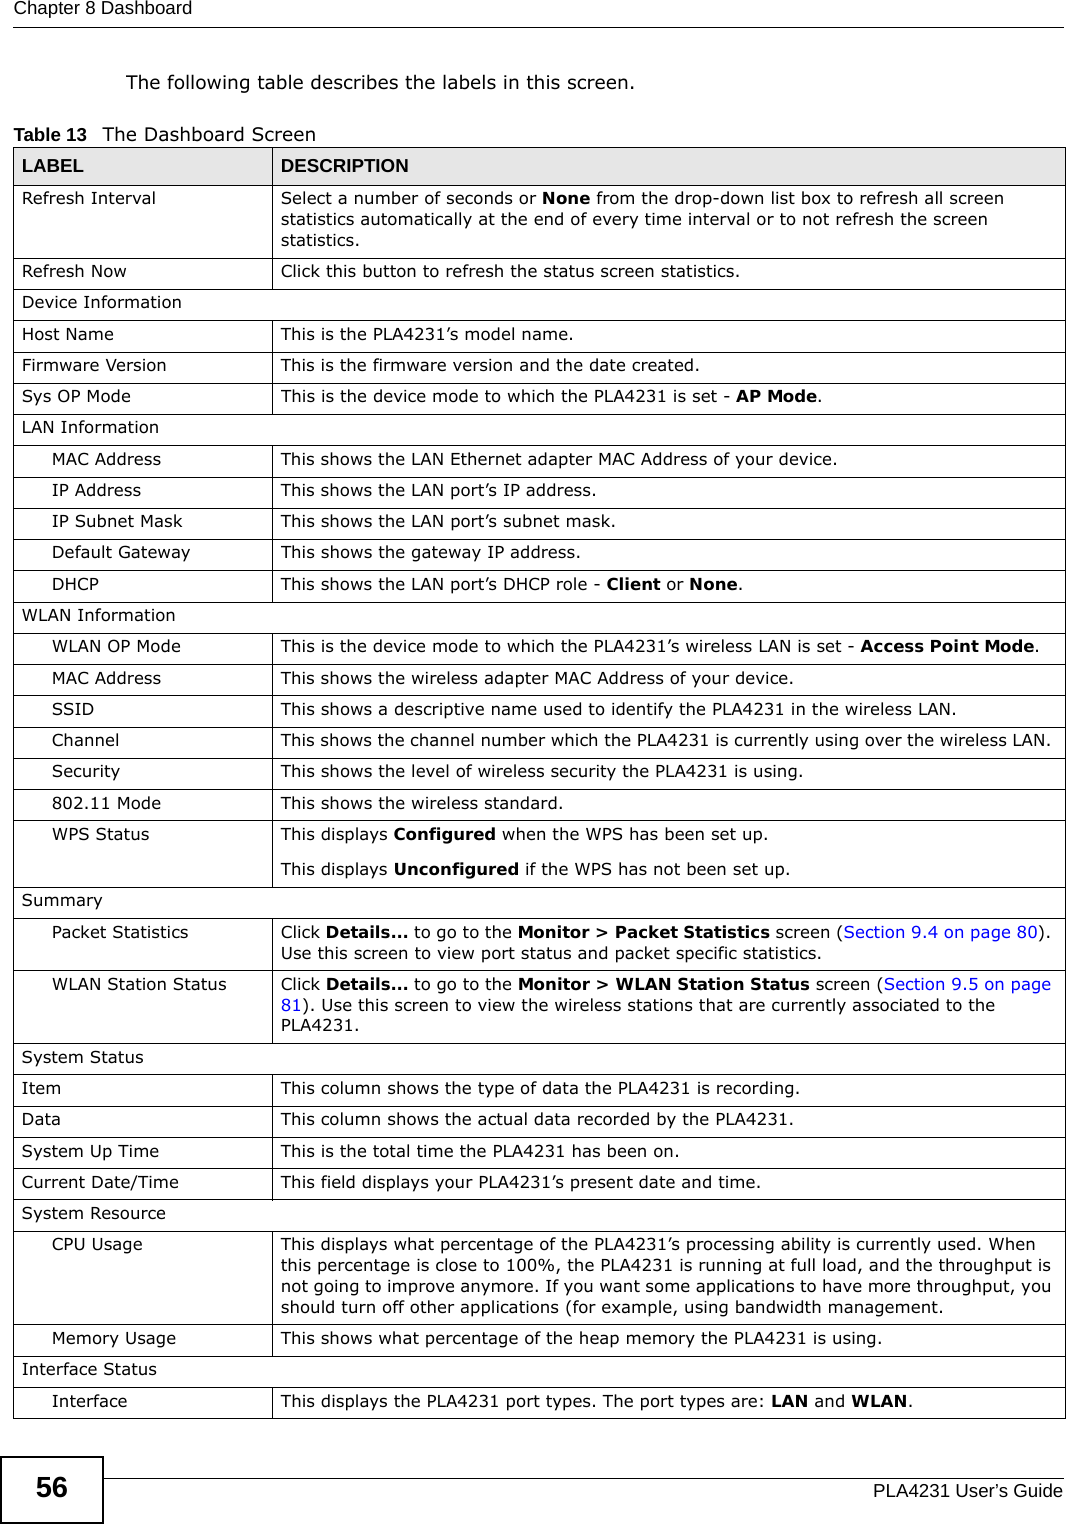 Chapter 8 DashboardPLA4231 User’s Guide56The following table describes the labels in this screen.Table 13   The Dashboard Screen LABEL DESCRIPTIONRefresh Interval Select a number of seconds or None from the drop-down list box to refresh all screen statistics automatically at the end of every time interval or to not refresh the screen statistics.Refresh Now Click this button to refresh the status screen statistics.Device InformationHost Name This is the PLA4231’s model name.Firmware Version This is the firmware version and the date created. Sys OP Mode This is the device mode to which the PLA4231 is set - AP Mode.LAN InformationMAC Address This shows the LAN Ethernet adapter MAC Address of your device.IP Address This shows the LAN port’s IP address.IP Subnet Mask This shows the LAN port’s subnet mask.Default Gateway This shows the gateway IP address.DHCP This shows the LAN port’s DHCP role - Client or None.WLAN InformationWLAN OP Mode This is the device mode to which the PLA4231’s wireless LAN is set - Access Point Mode.MAC Address This shows the wireless adapter MAC Address of your device.SSID This shows a descriptive name used to identify the PLA4231 in the wireless LAN. Channel This shows the channel number which the PLA4231 is currently using over the wireless LAN. Security This shows the level of wireless security the PLA4231 is using.802.11 Mode This shows the wireless standard.WPS Status This displays Configured when the WPS has been set up. This displays Unconfigured if the WPS has not been set up.SummaryPacket Statistics Click Details... to go to the Monitor &gt; Packet Statistics screen (Section 9.4 on page 80). Use this screen to view port status and packet specific statistics.WLAN Station Status Click Details... to go to the Monitor &gt; WLAN Station Status screen (Section 9.5 on page 81). Use this screen to view the wireless stations that are currently associated to the PLA4231.System StatusItem This column shows the type of data the PLA4231 is recording.Data This column shows the actual data recorded by the PLA4231.System Up Time This is the total time the PLA4231 has been on.Current Date/Time This field displays your PLA4231’s present date and time.System ResourceCPU Usage This displays what percentage of the PLA4231’s processing ability is currently used. When this percentage is close to 100%, the PLA4231 is running at full load, and the throughput is not going to improve anymore. If you want some applications to have more throughput, you should turn off other applications (for example, using bandwidth management.Memory Usage This shows what percentage of the heap memory the PLA4231 is using. Interface StatusInterface This displays the PLA4231 port types. The port types are: LAN and WLAN.